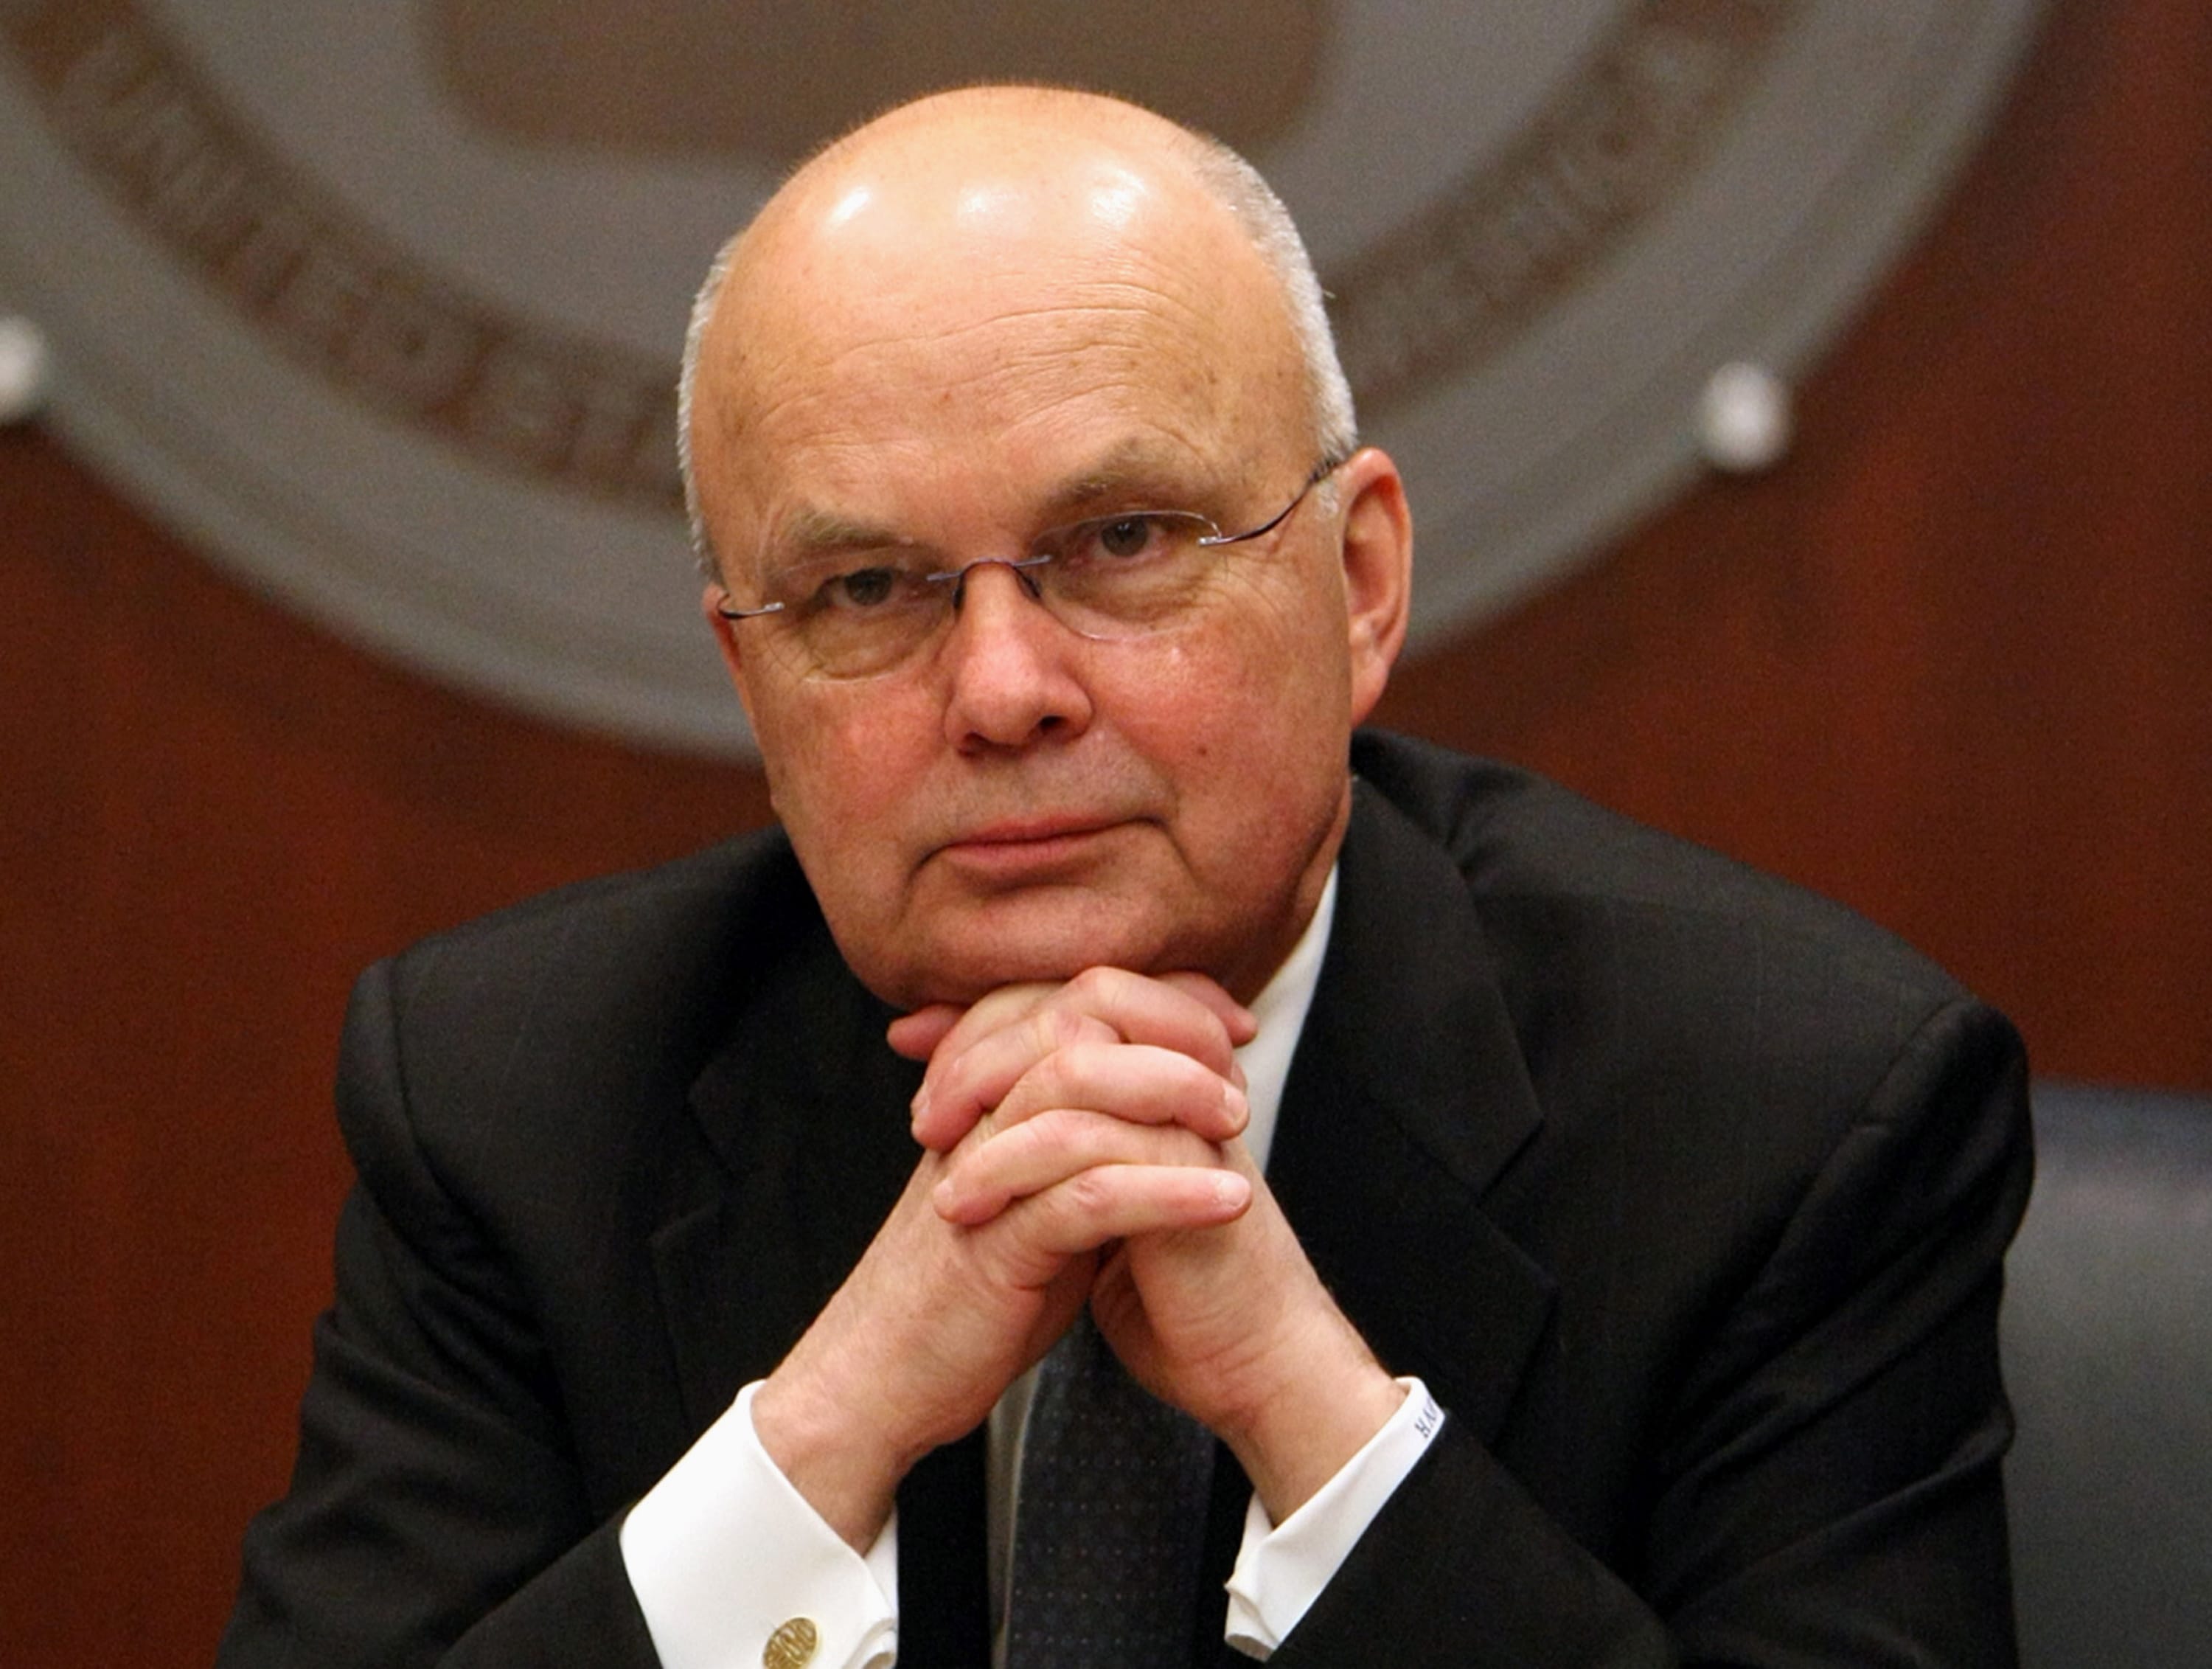 Then-CIA Director Michael Hayden, and a former National Security Agency chief, participates in a news conference at CIA headquarters in Langley, Va., on Jan.